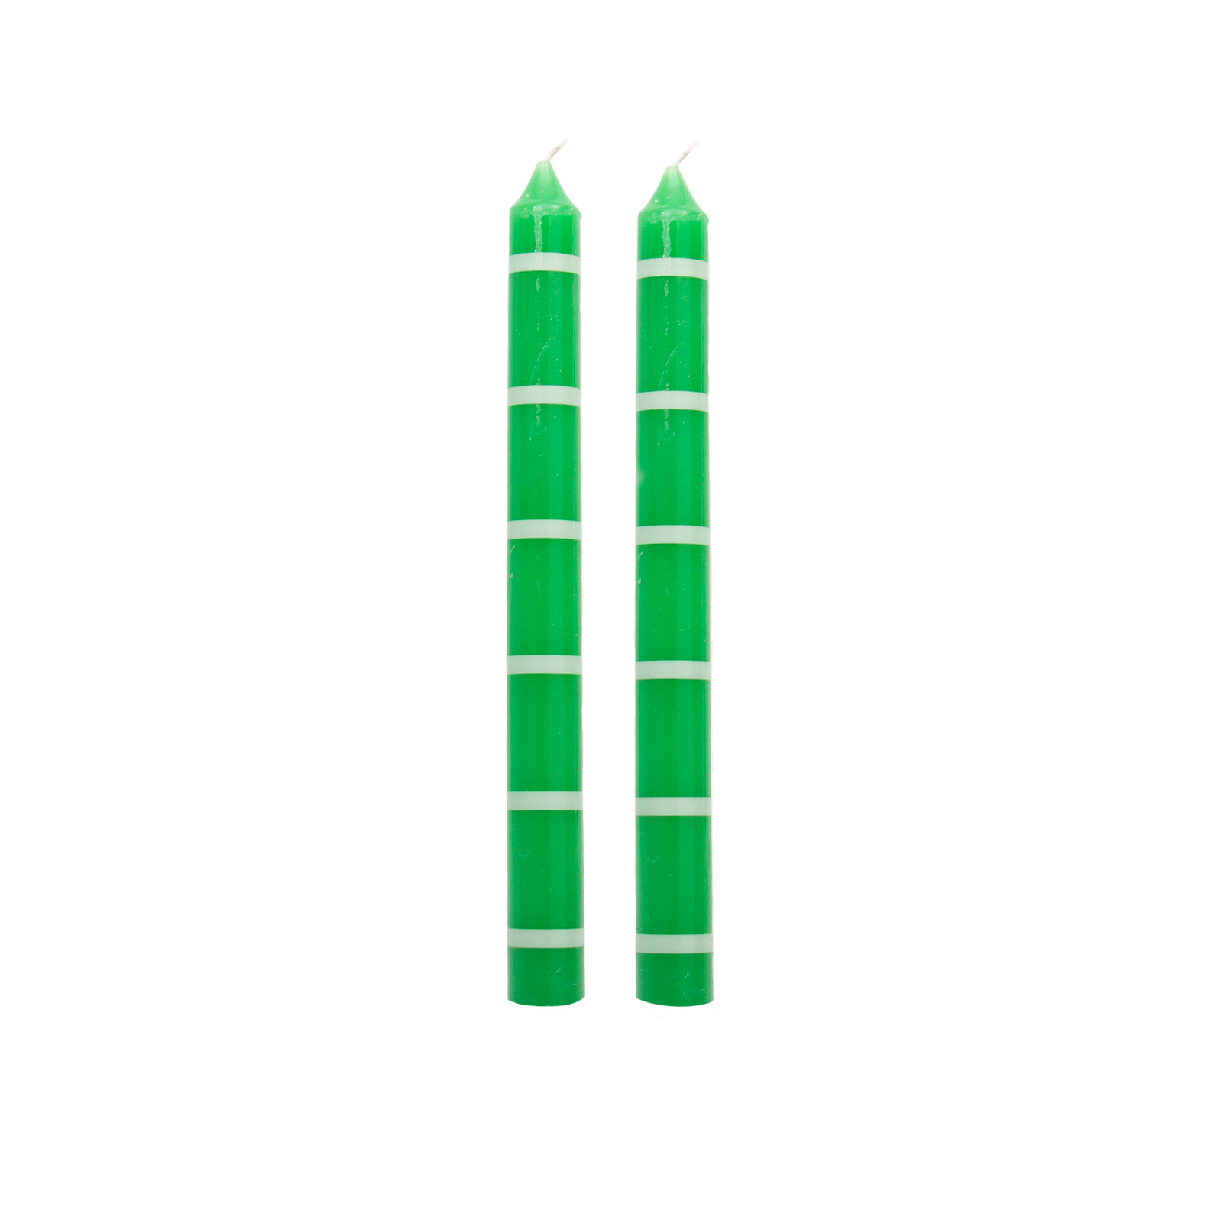 PACK OF 2 LONG EMERALD CANDLES HF - Item